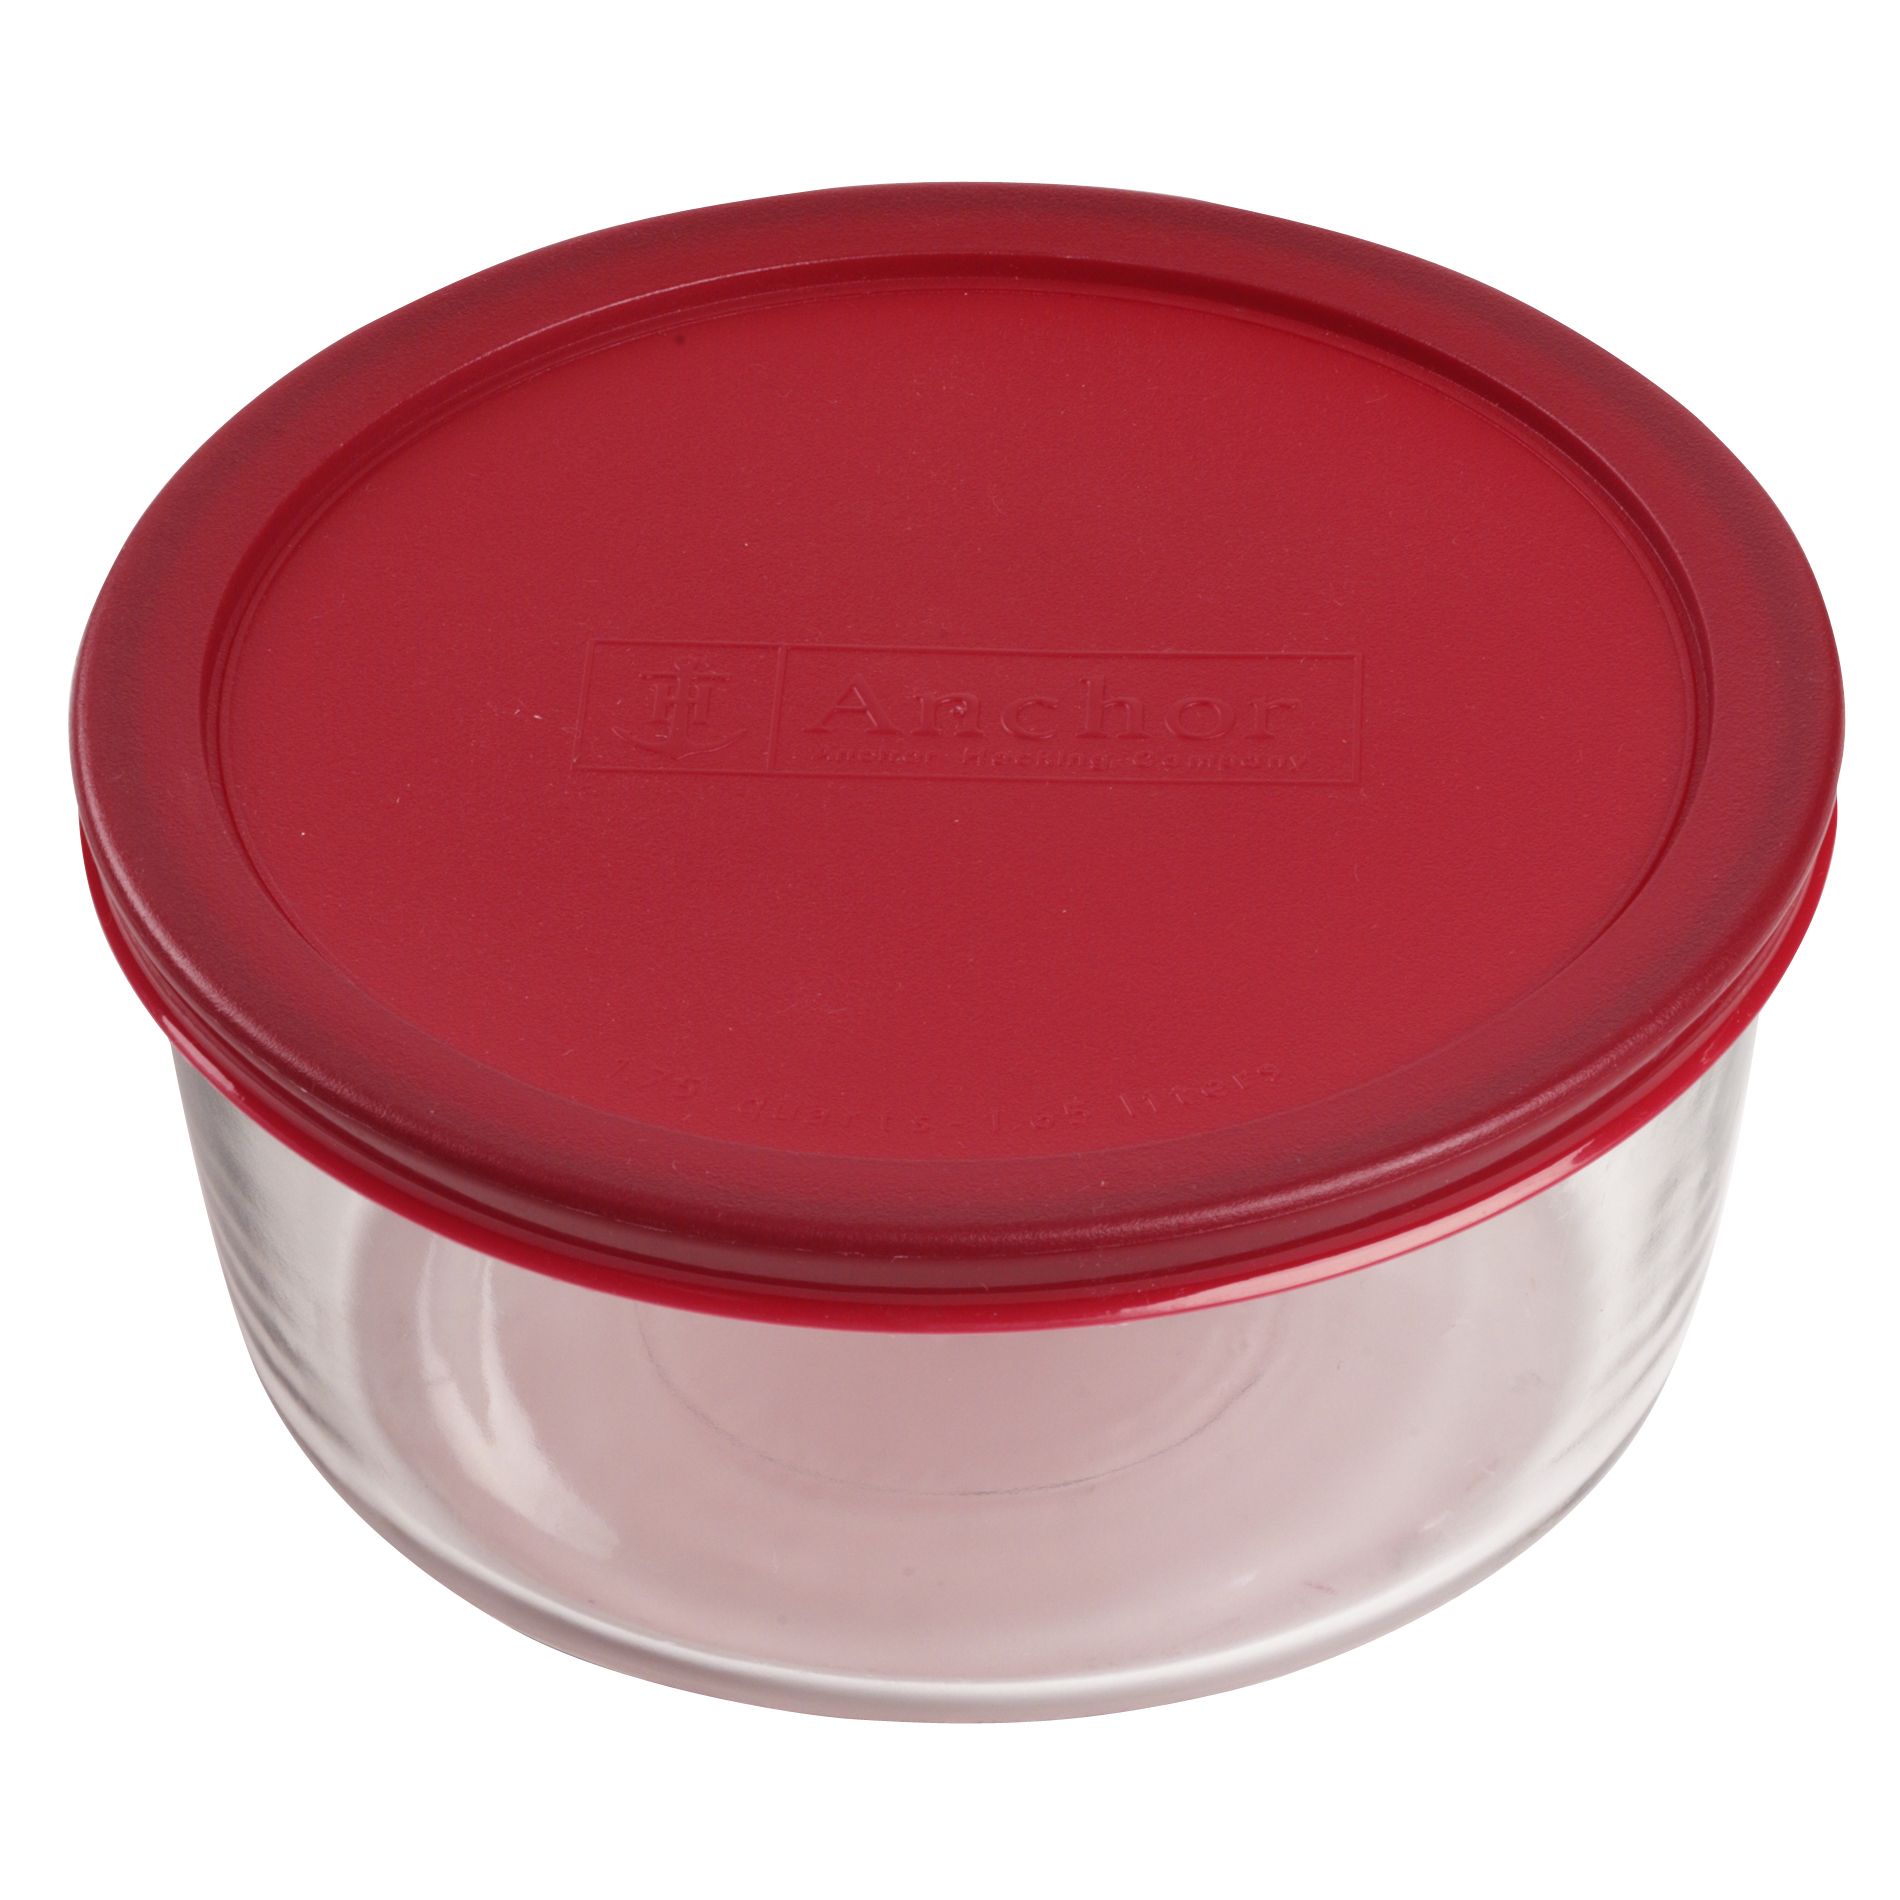 Anchor Hocking 7 Cup Round Bakeware With Red Lid